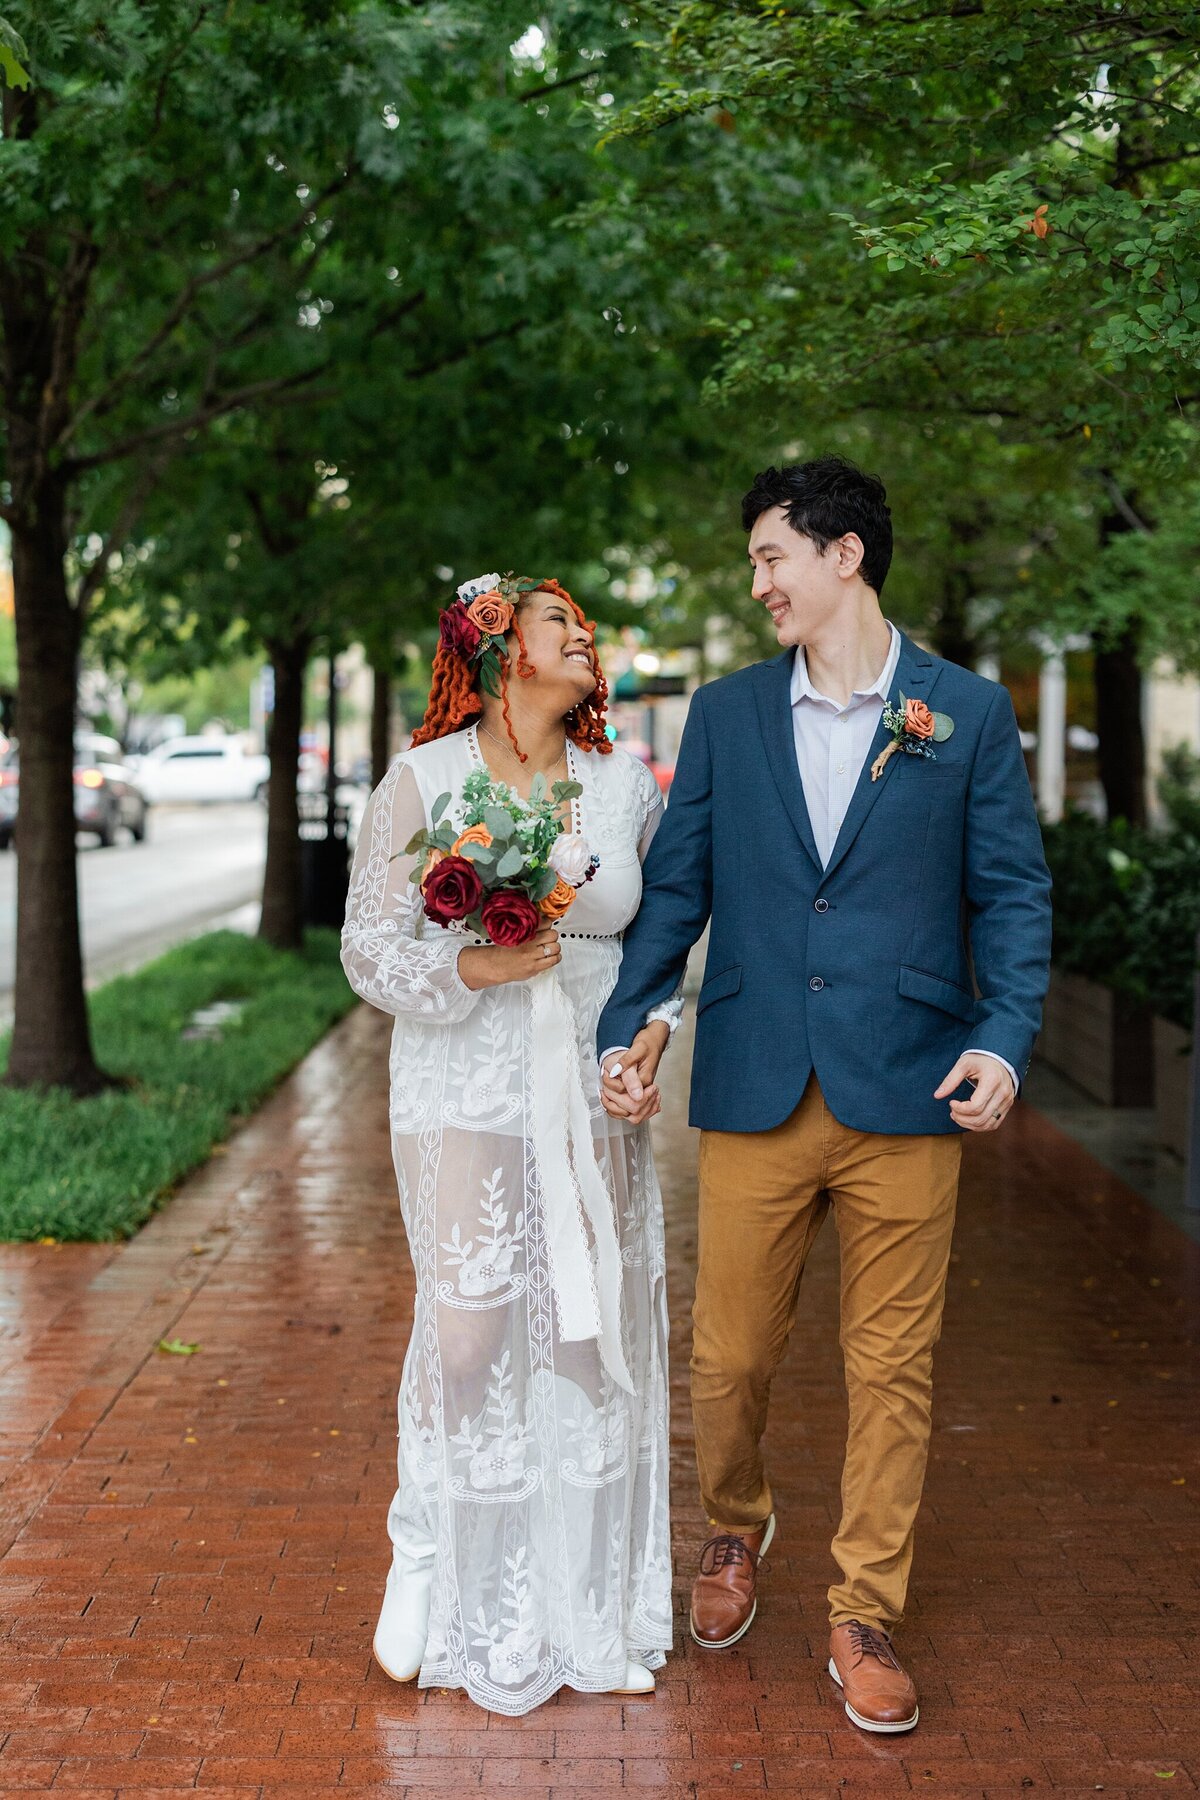 Portrait of a bride and groom walking down a brick sidewalk after their elopement at the Tarrant County Courthouse in Fort Worth, Texas. The bride is on the left and is wearing a long sleeve, intricately detailed, white dress with a floral hairpiece and is holding a bouquet. The groom is on the right and is wearing a blue jacket, tan dress pants, and a boutonniere. They hold hands and smile at each other as they walk towards the camera.